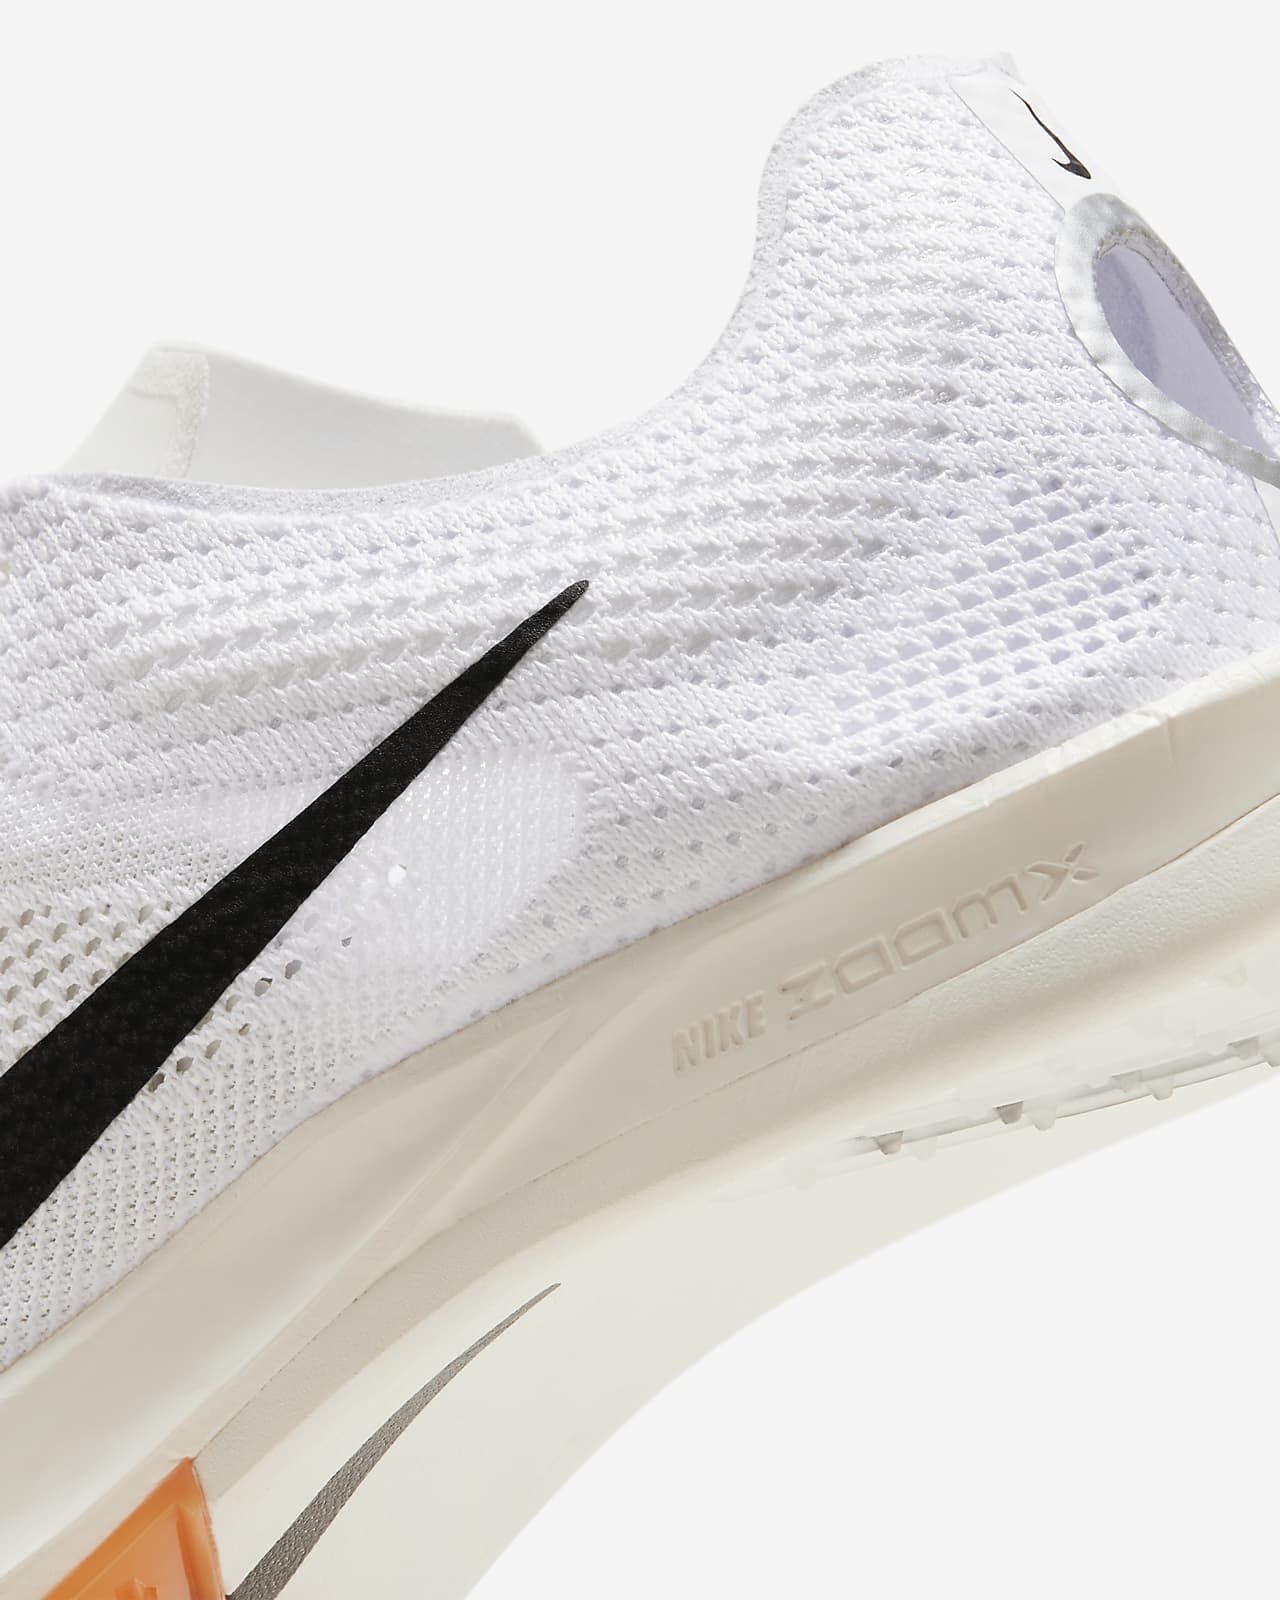 Nike Dragonfly 2 Proto Track & Field Distance Spikes